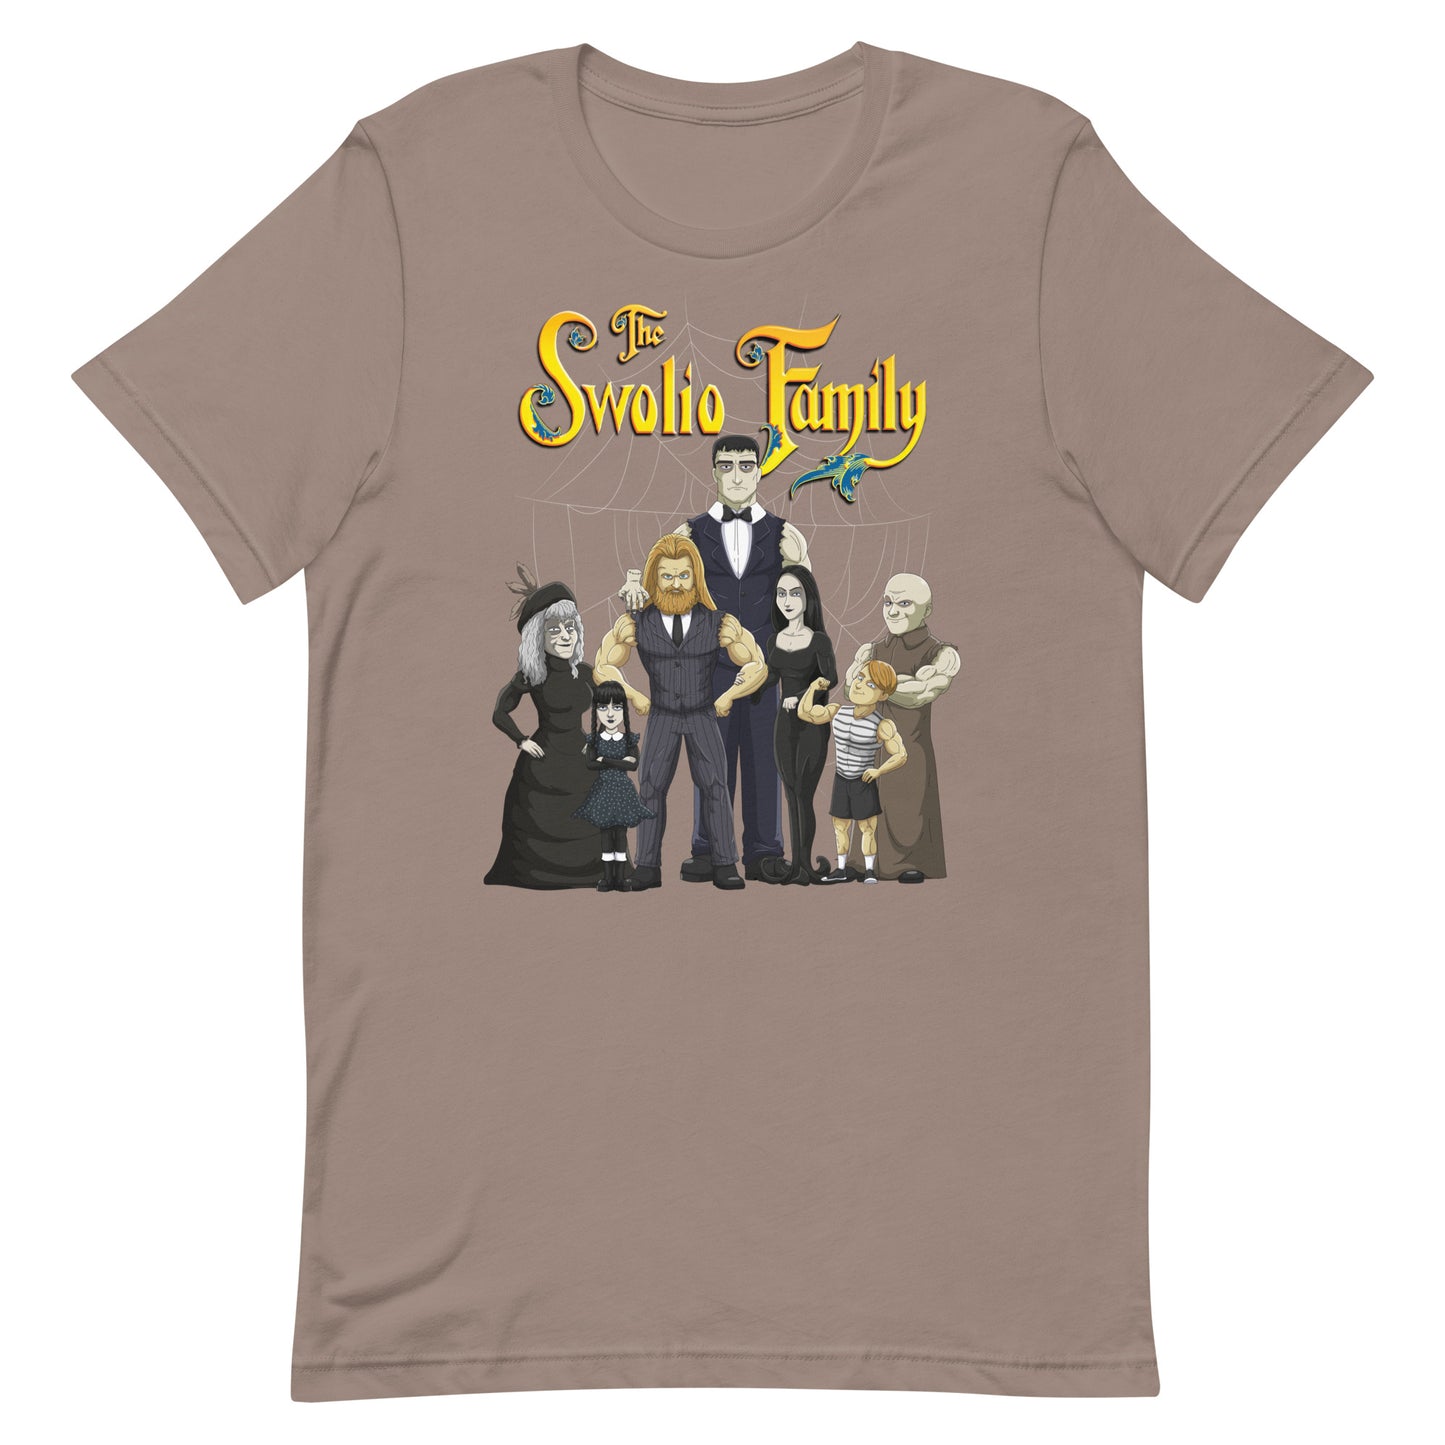 The Swolio Family T-Shirt